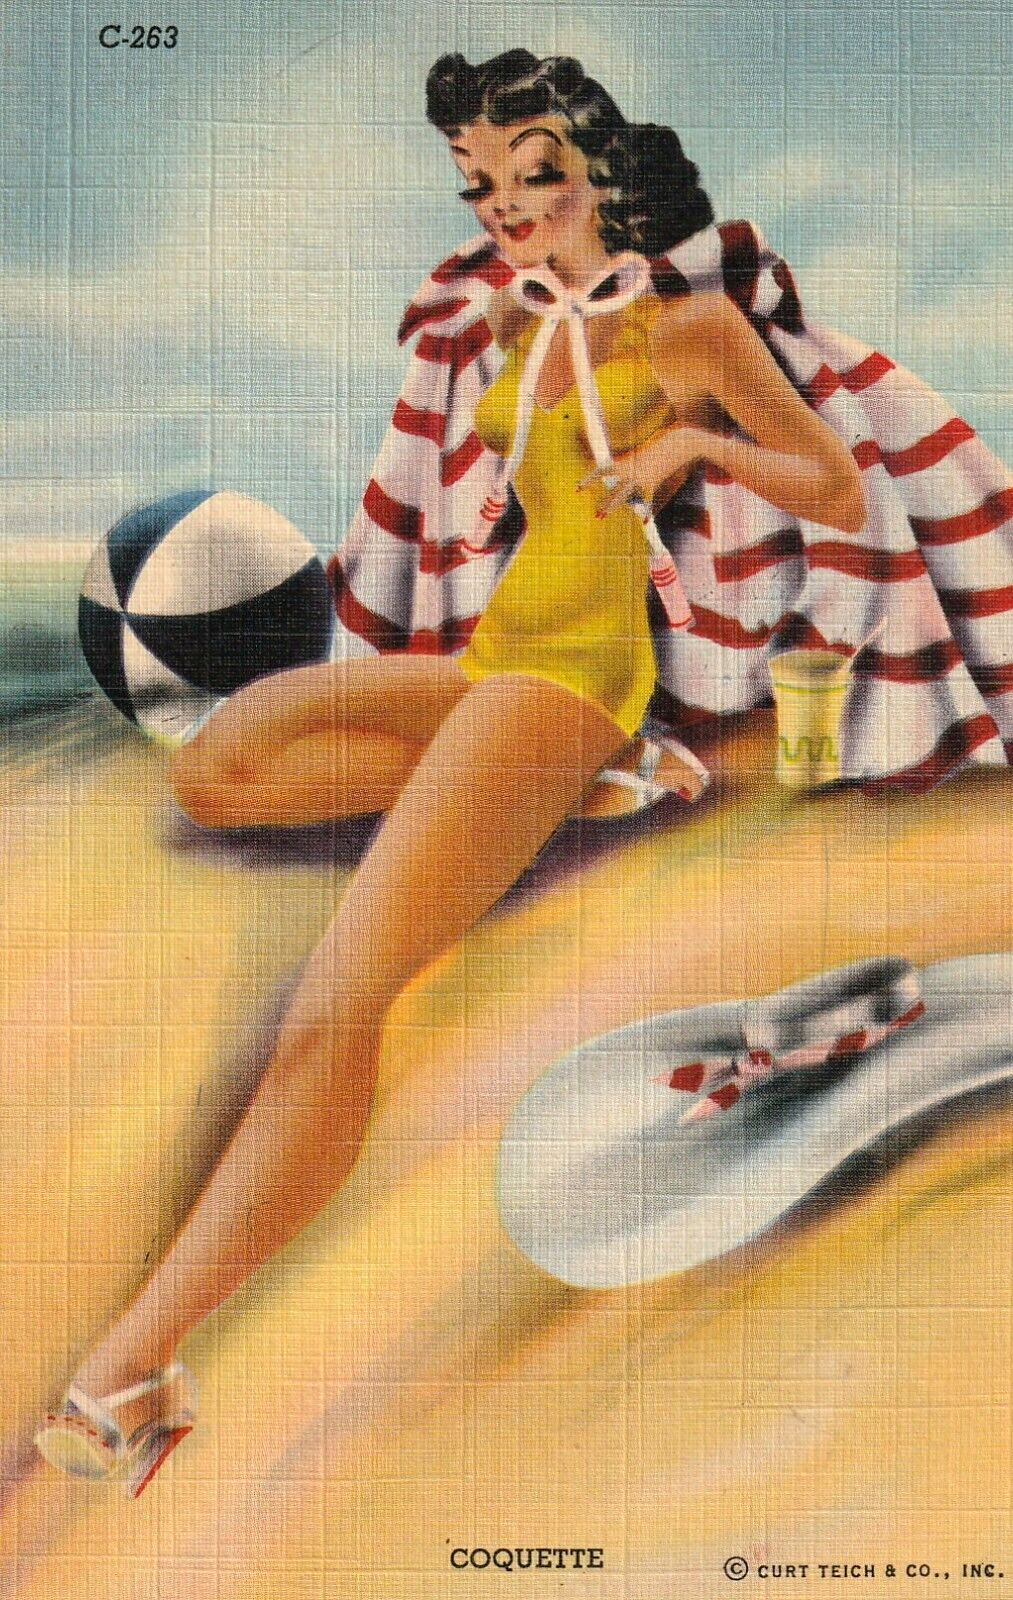 Coquette Glamour PinUp Girl Bathing Beauties Series Curteich C263 Postcard